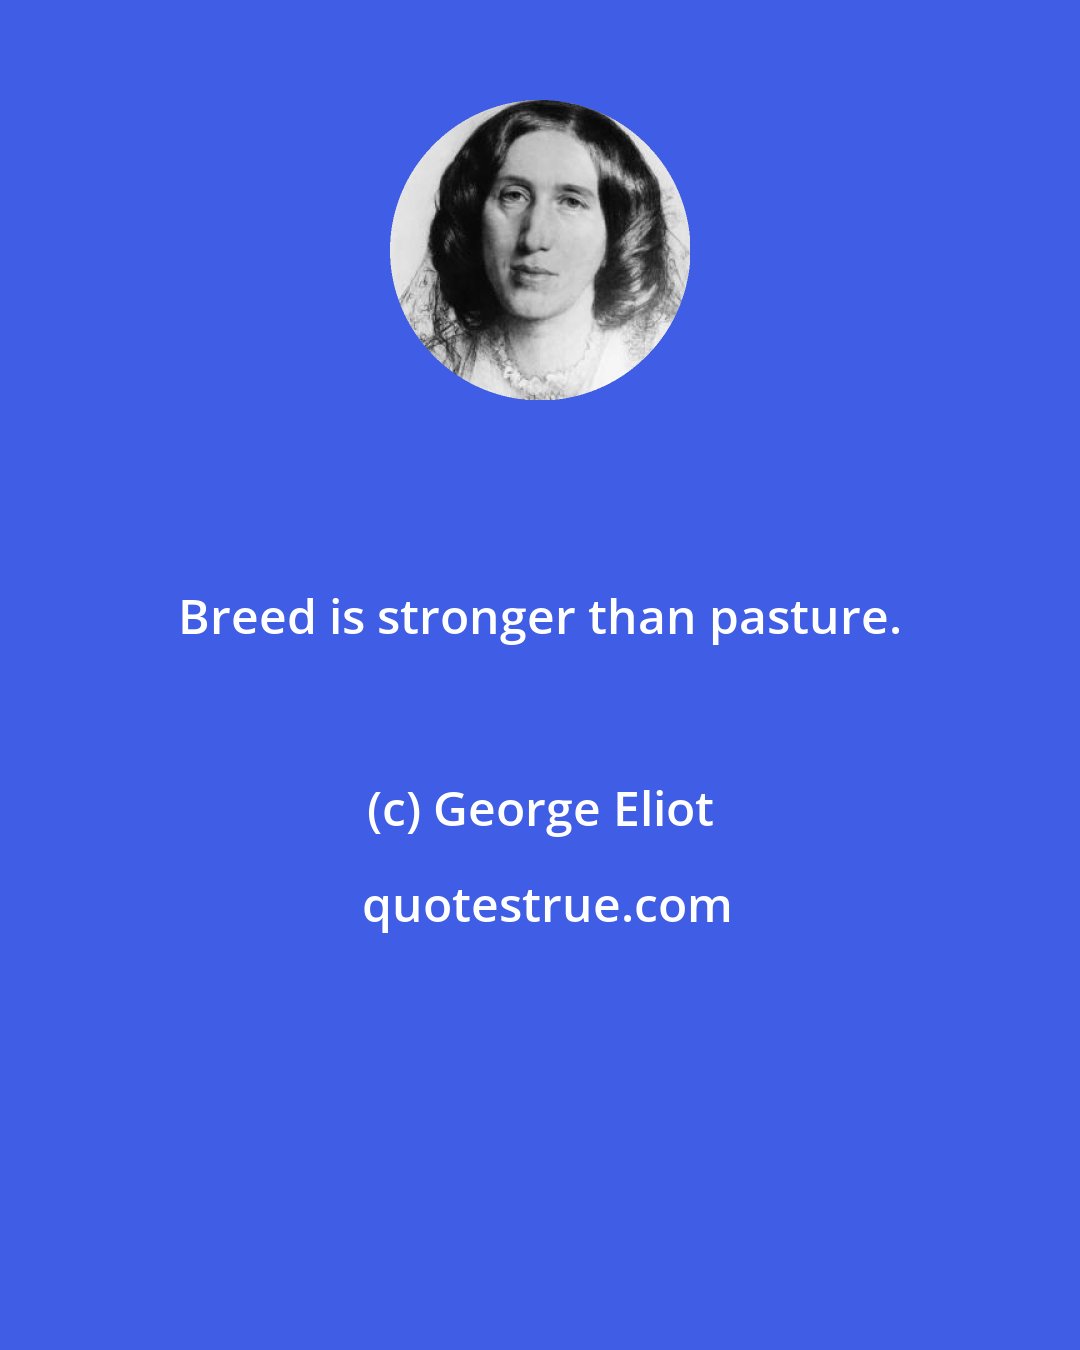 George Eliot: Breed is stronger than pasture.